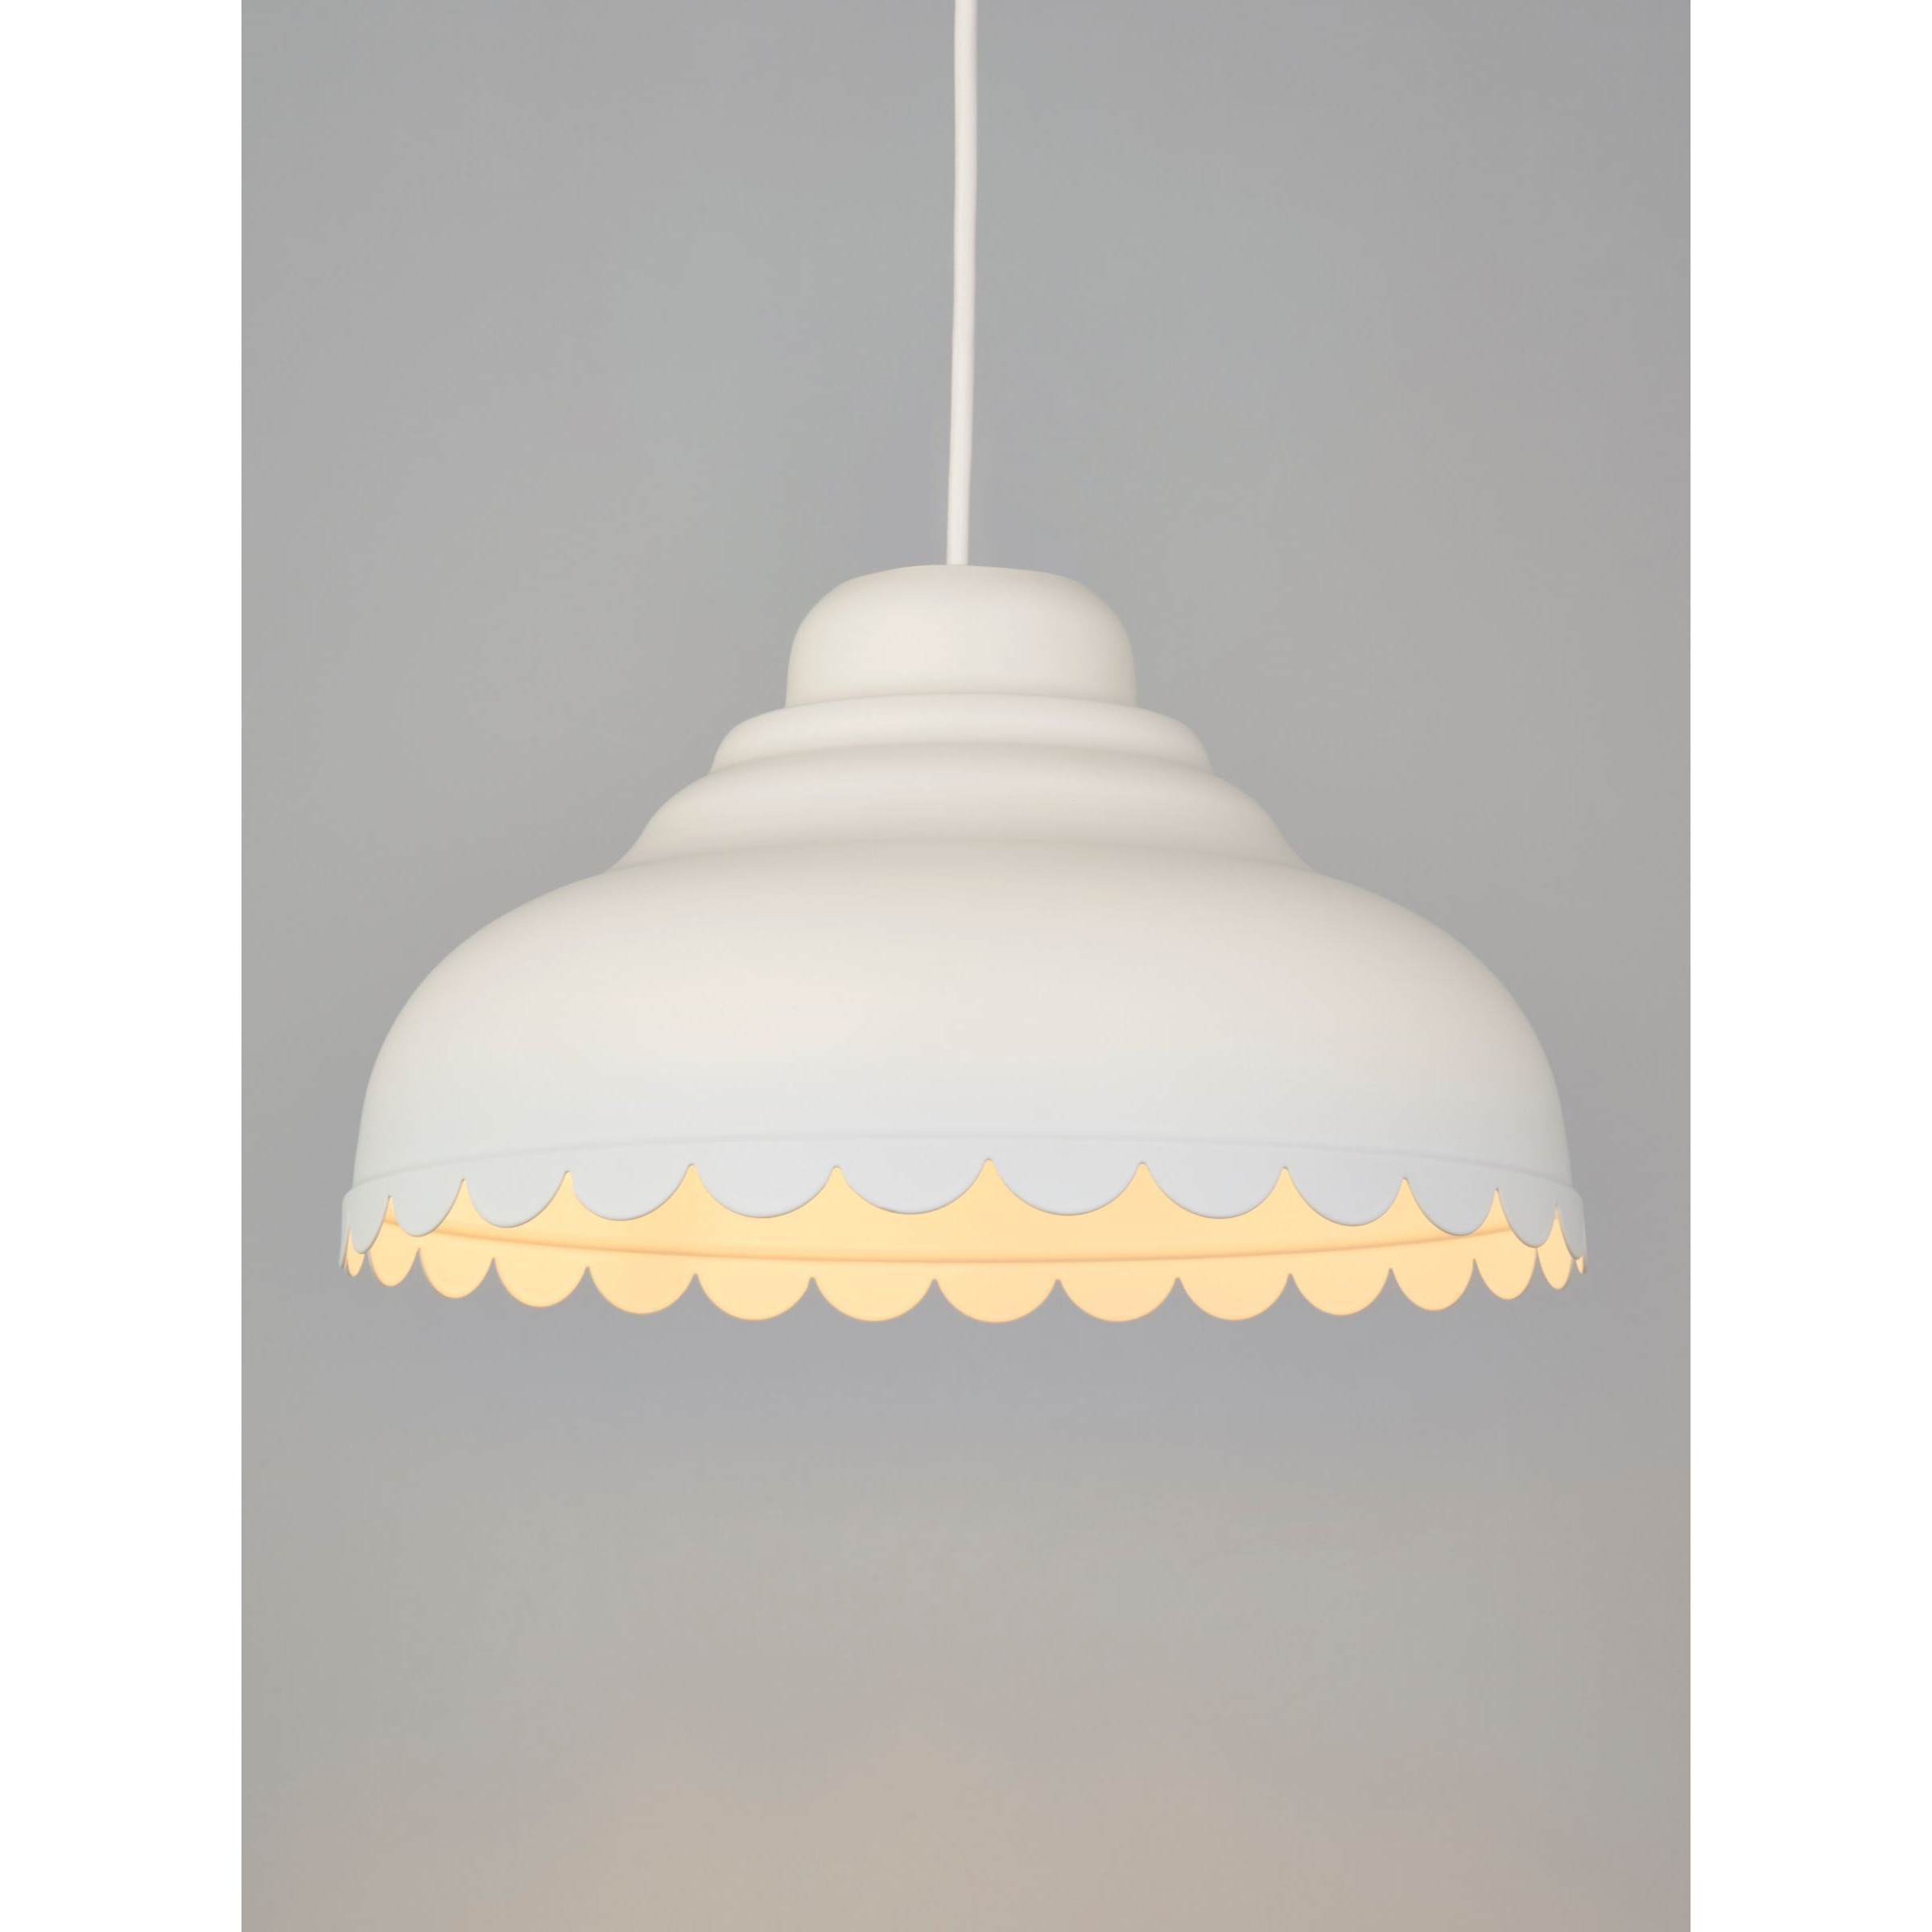 John Lewis Scallop Easy-to-Fit Ceiling Shade - image 1